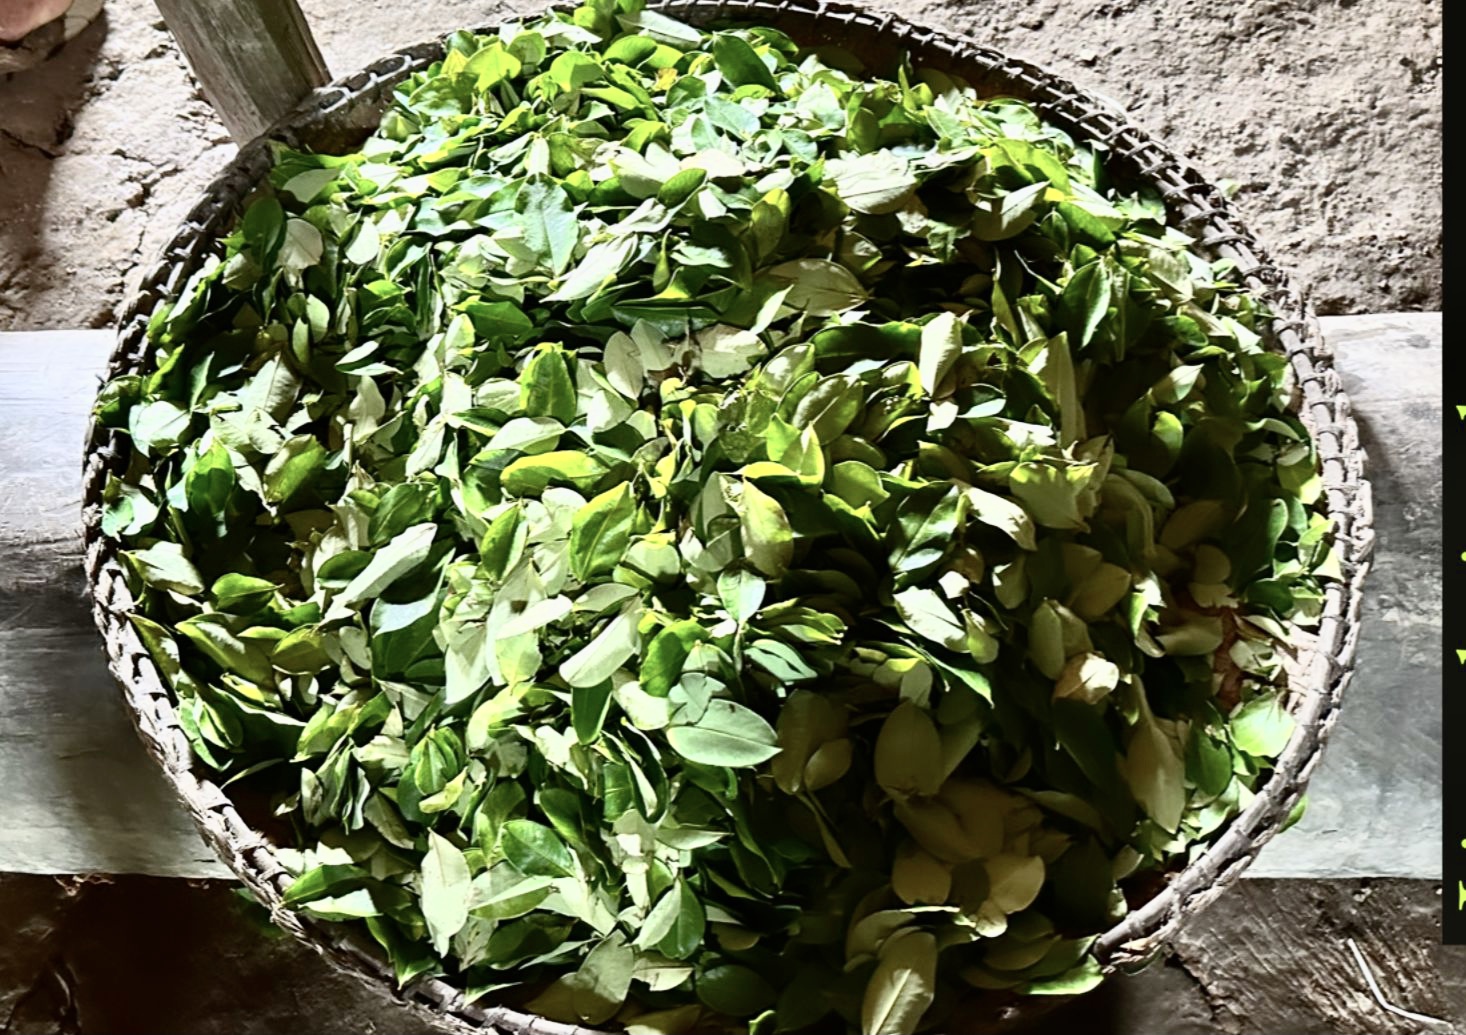 A bowl of coca leaves